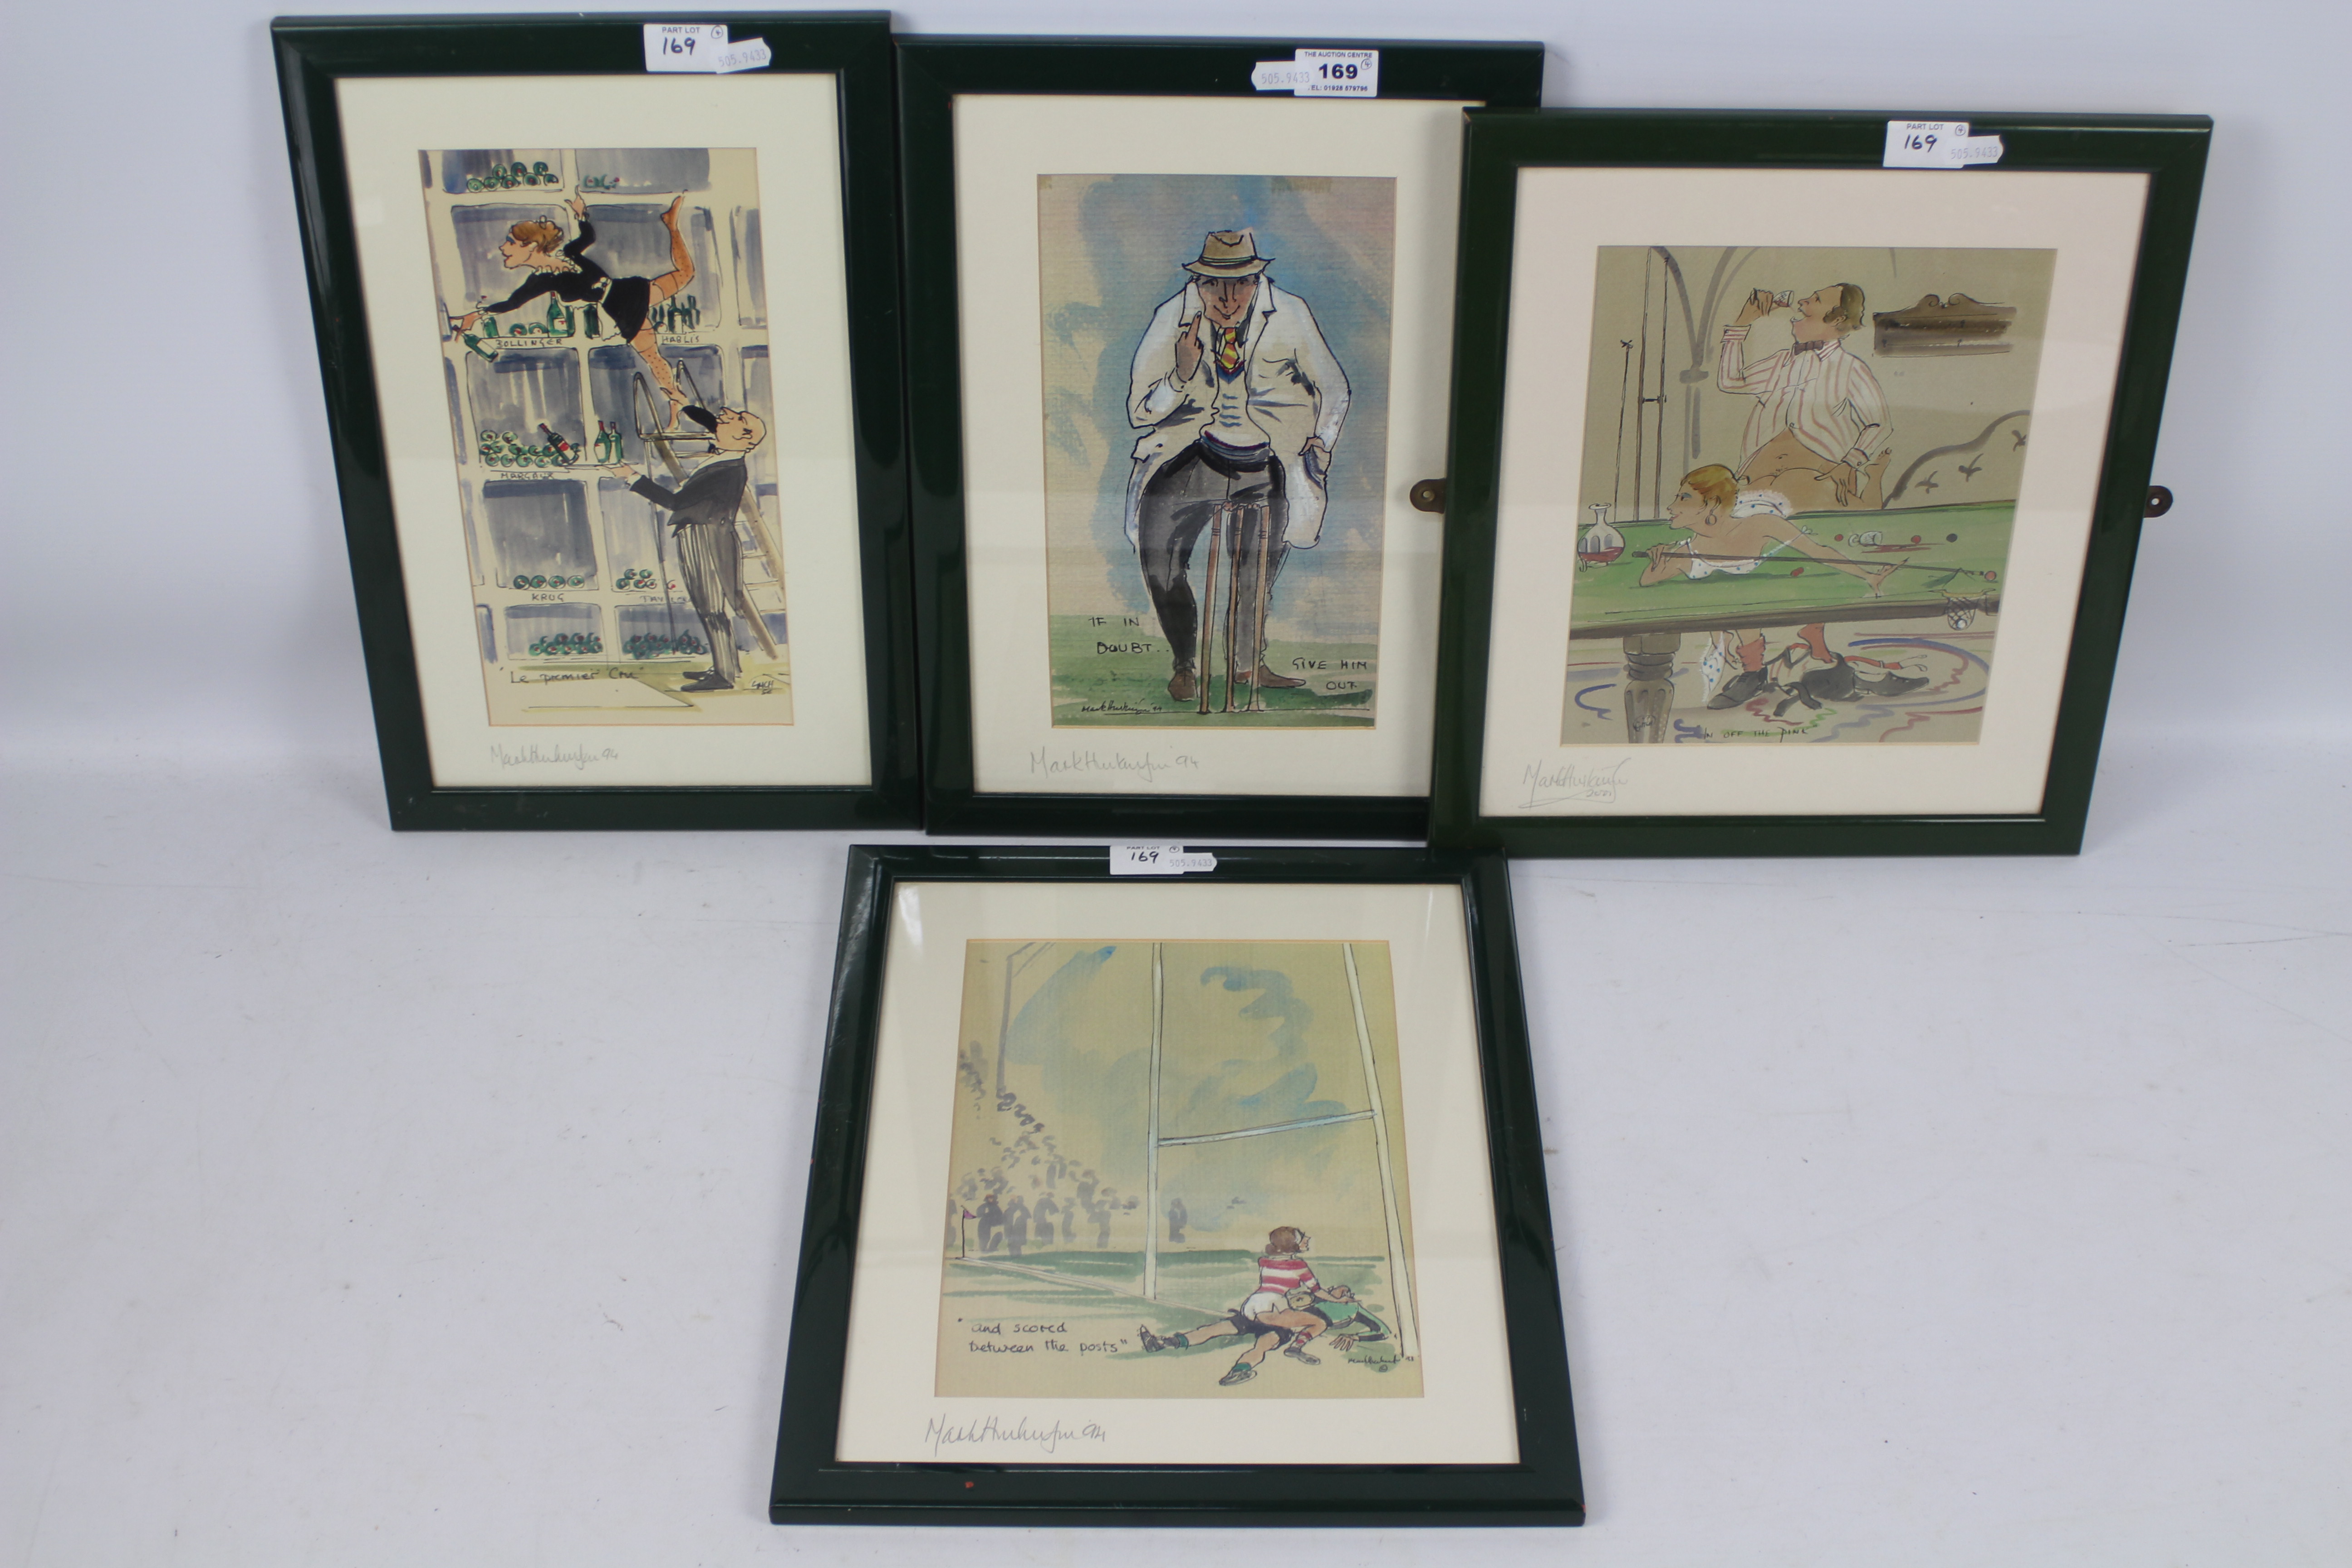 Mark Huskinson (1935-2018) - Four risque colour prints, signed and dated in pencil by the artist,